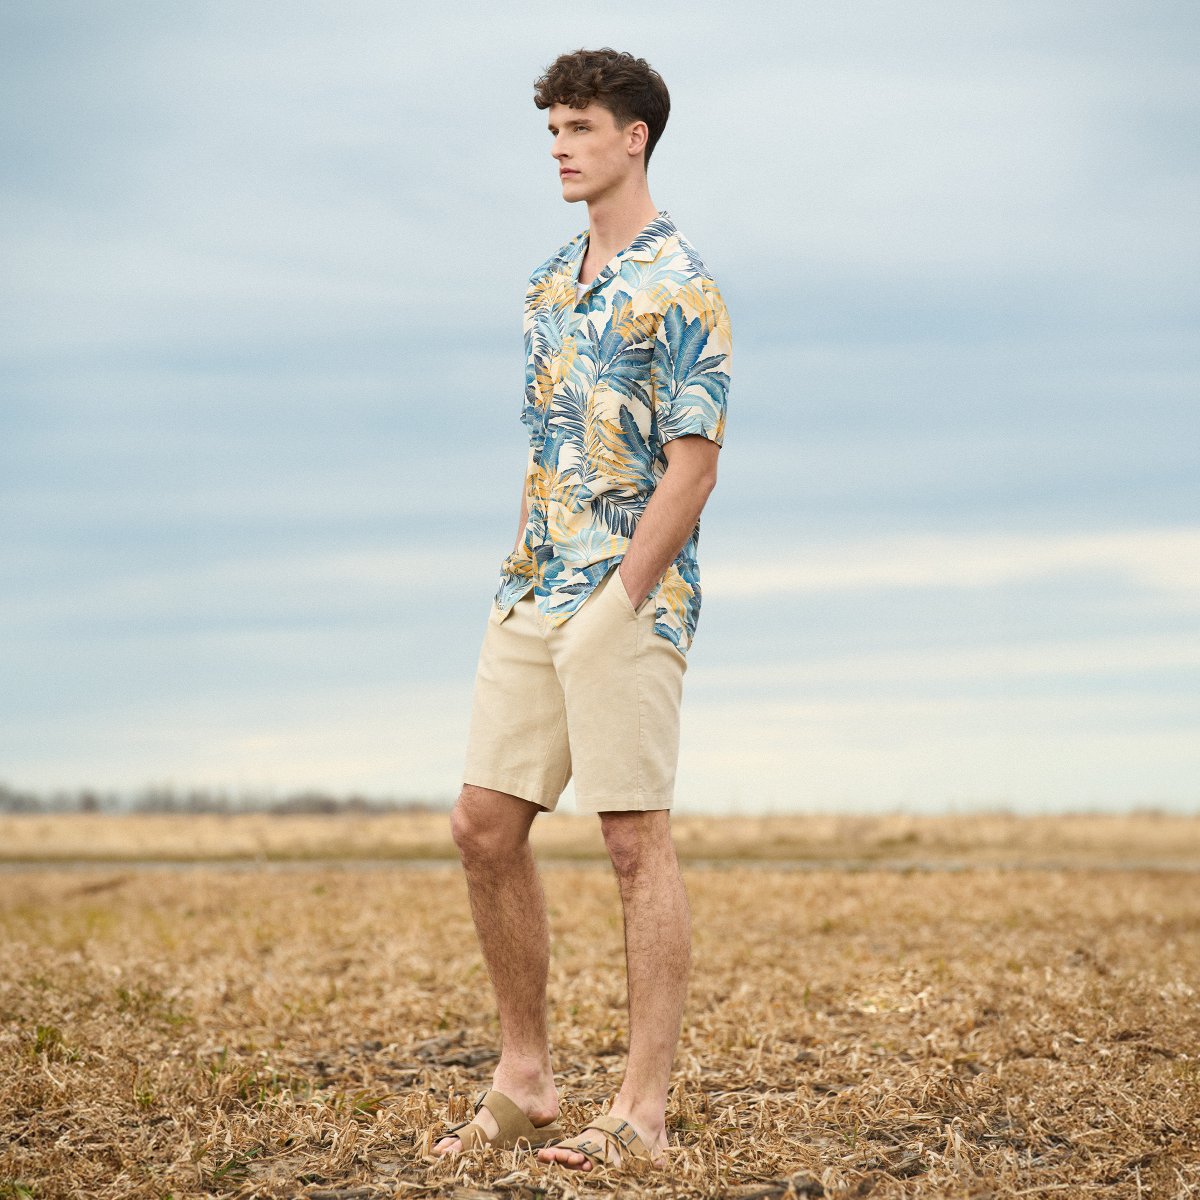 When you're feeling the heat, you can count on our summer styles to keep you cool and confident.

Model Height: 6'4'
Top: MT
Bottom: 32T
.
.
.
#americantall #wethetall #tallmen #tallguy #tallclothing #tallstyle #teamtall #menswear #menstyle #summerstyle